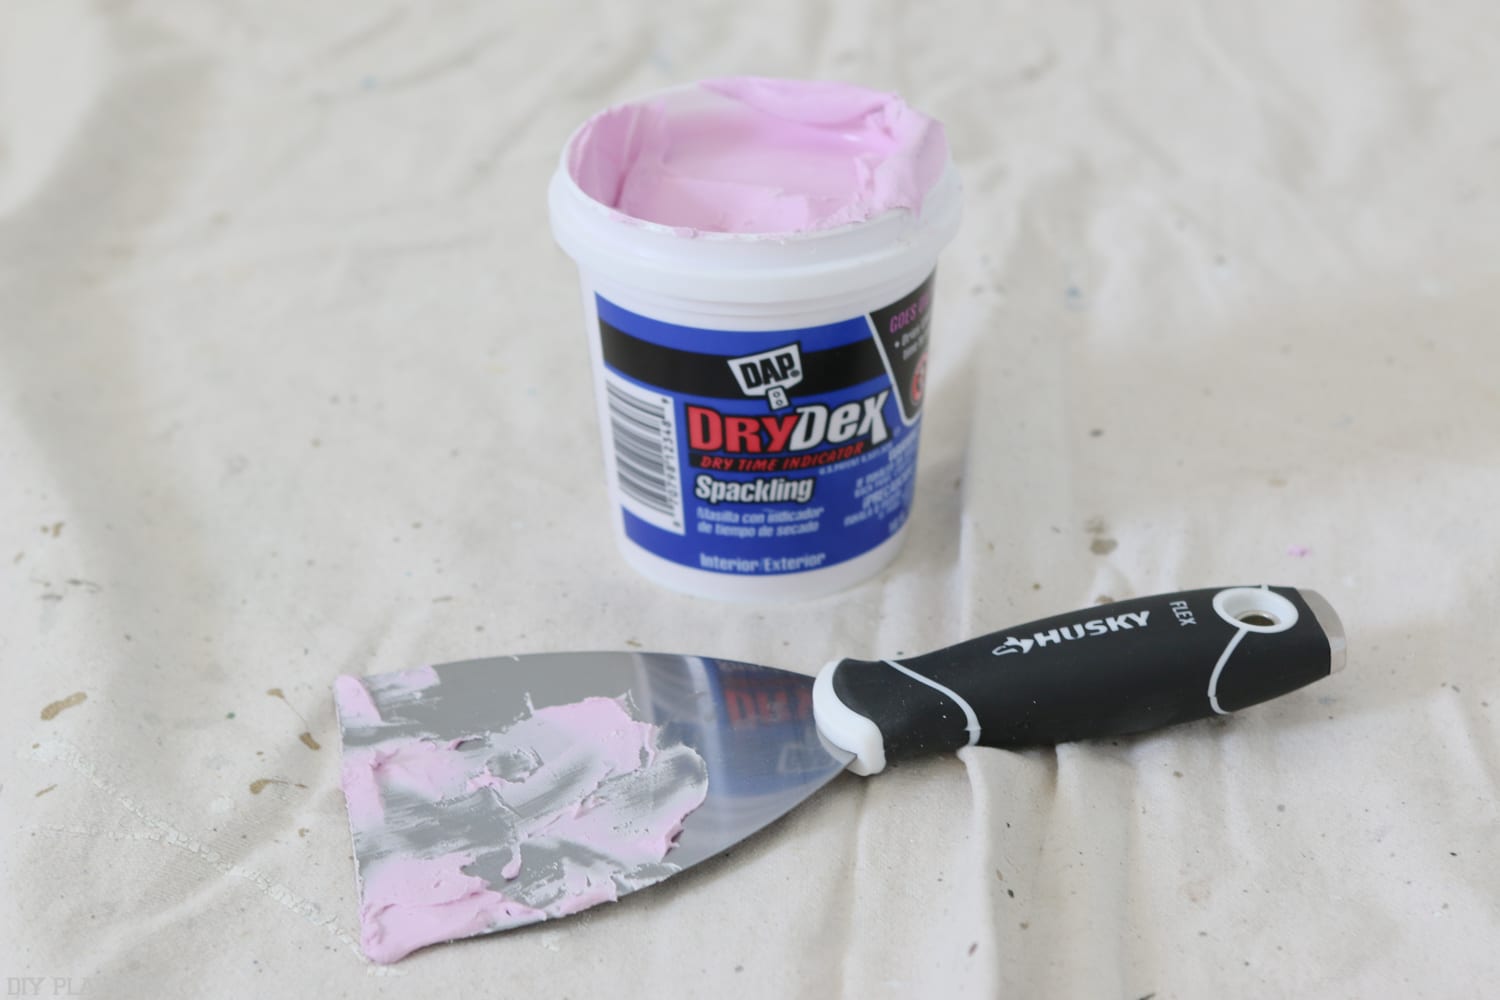 We used bright pink spackle to cover any imperfections and holes in the walls.